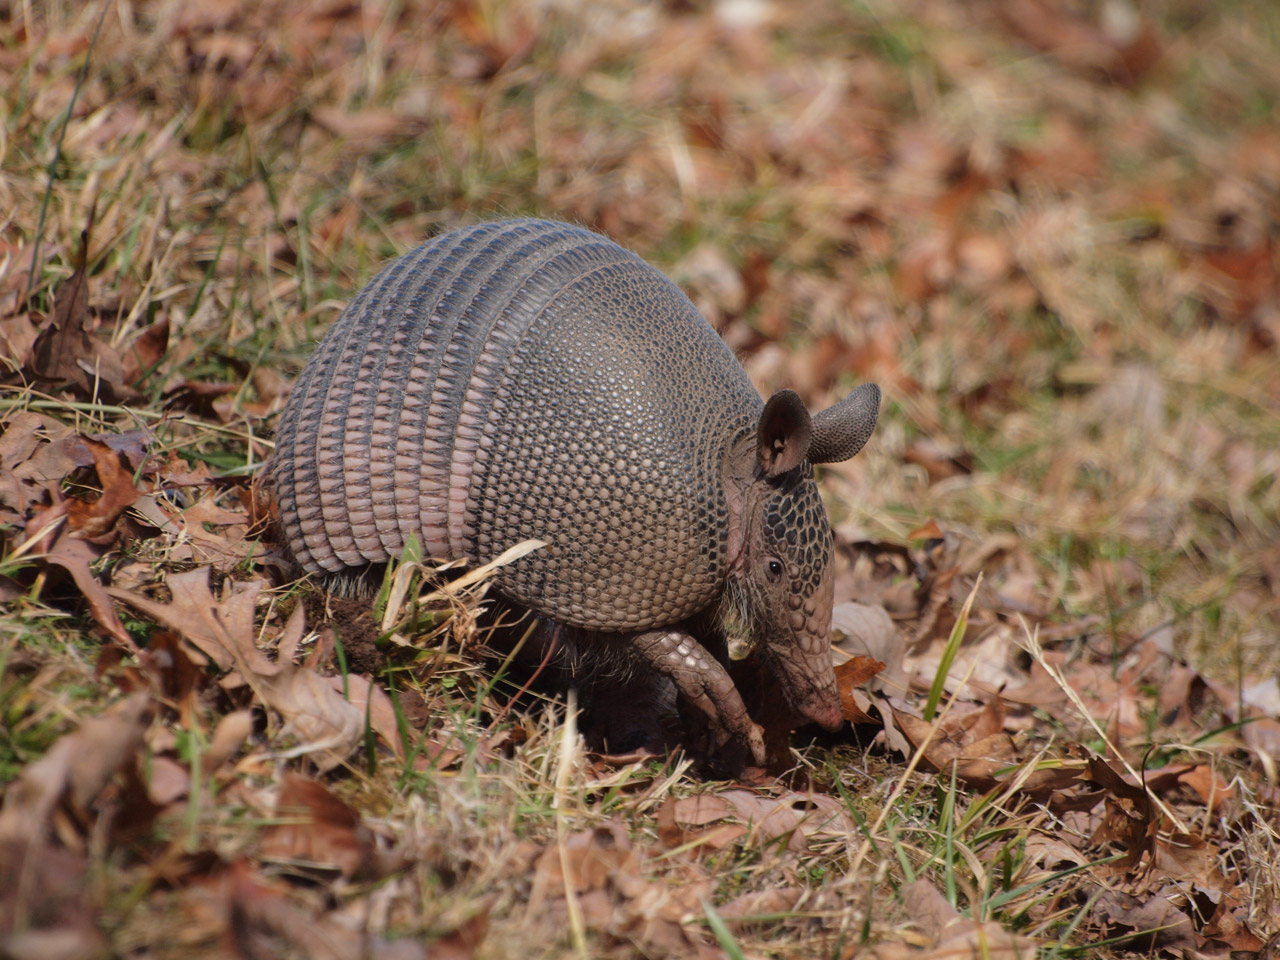 Armadillo eating along the Natchez Trace Parkway